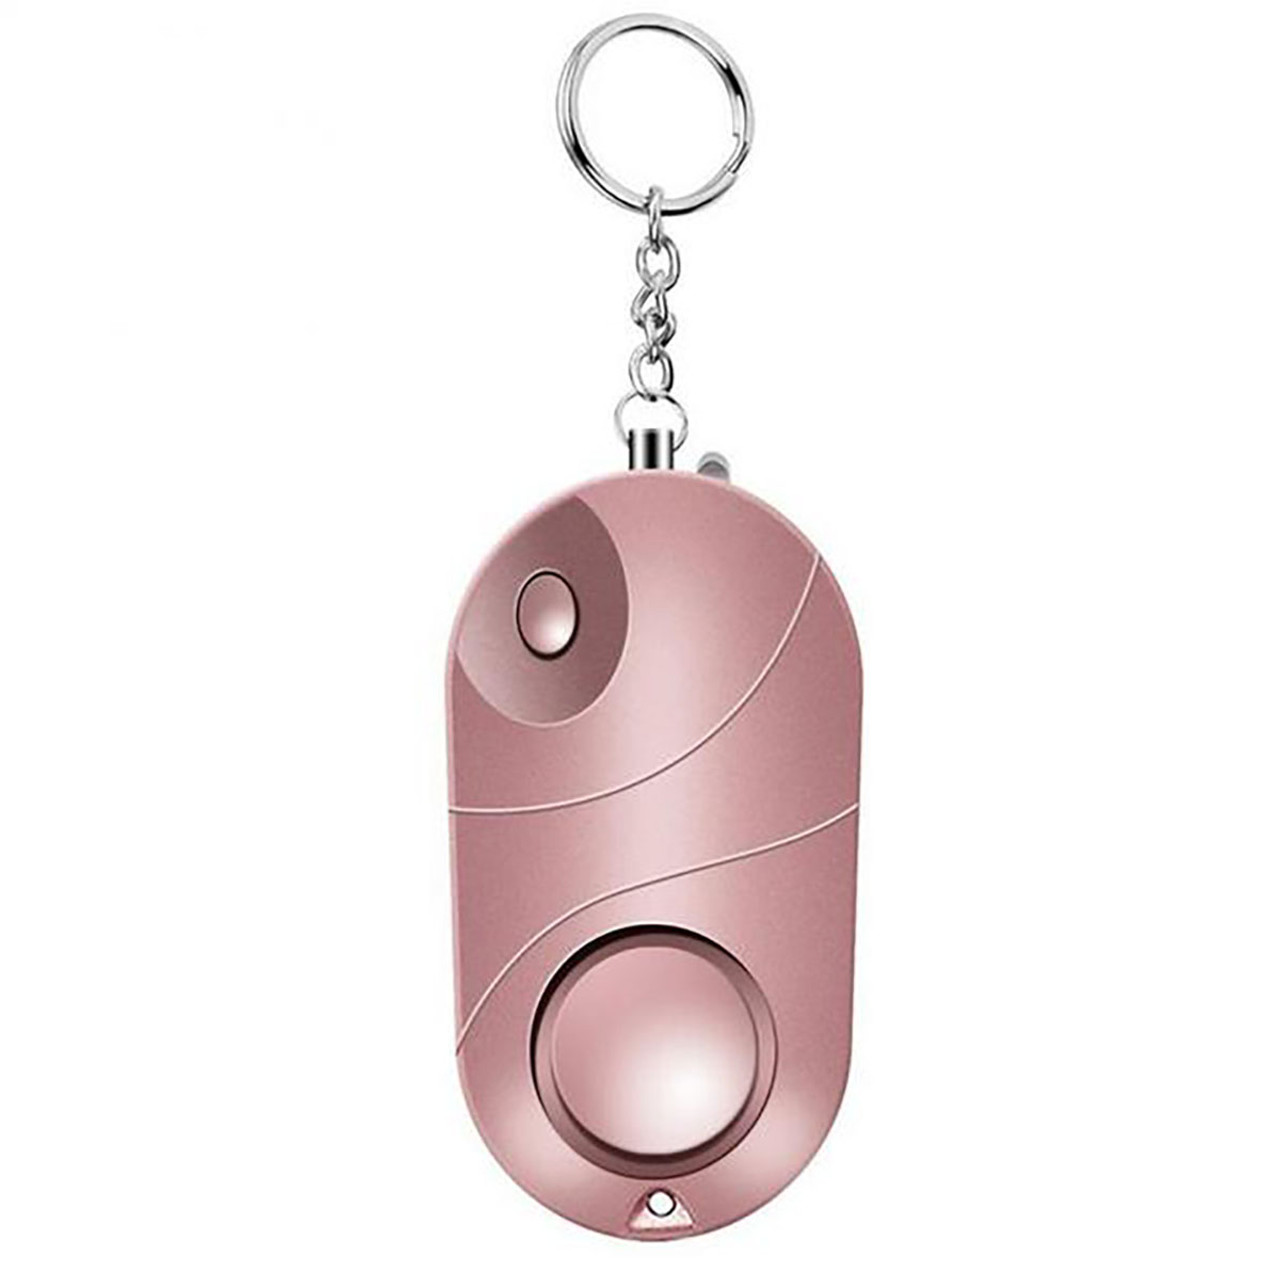 Loud Protector Personal Alarm product image